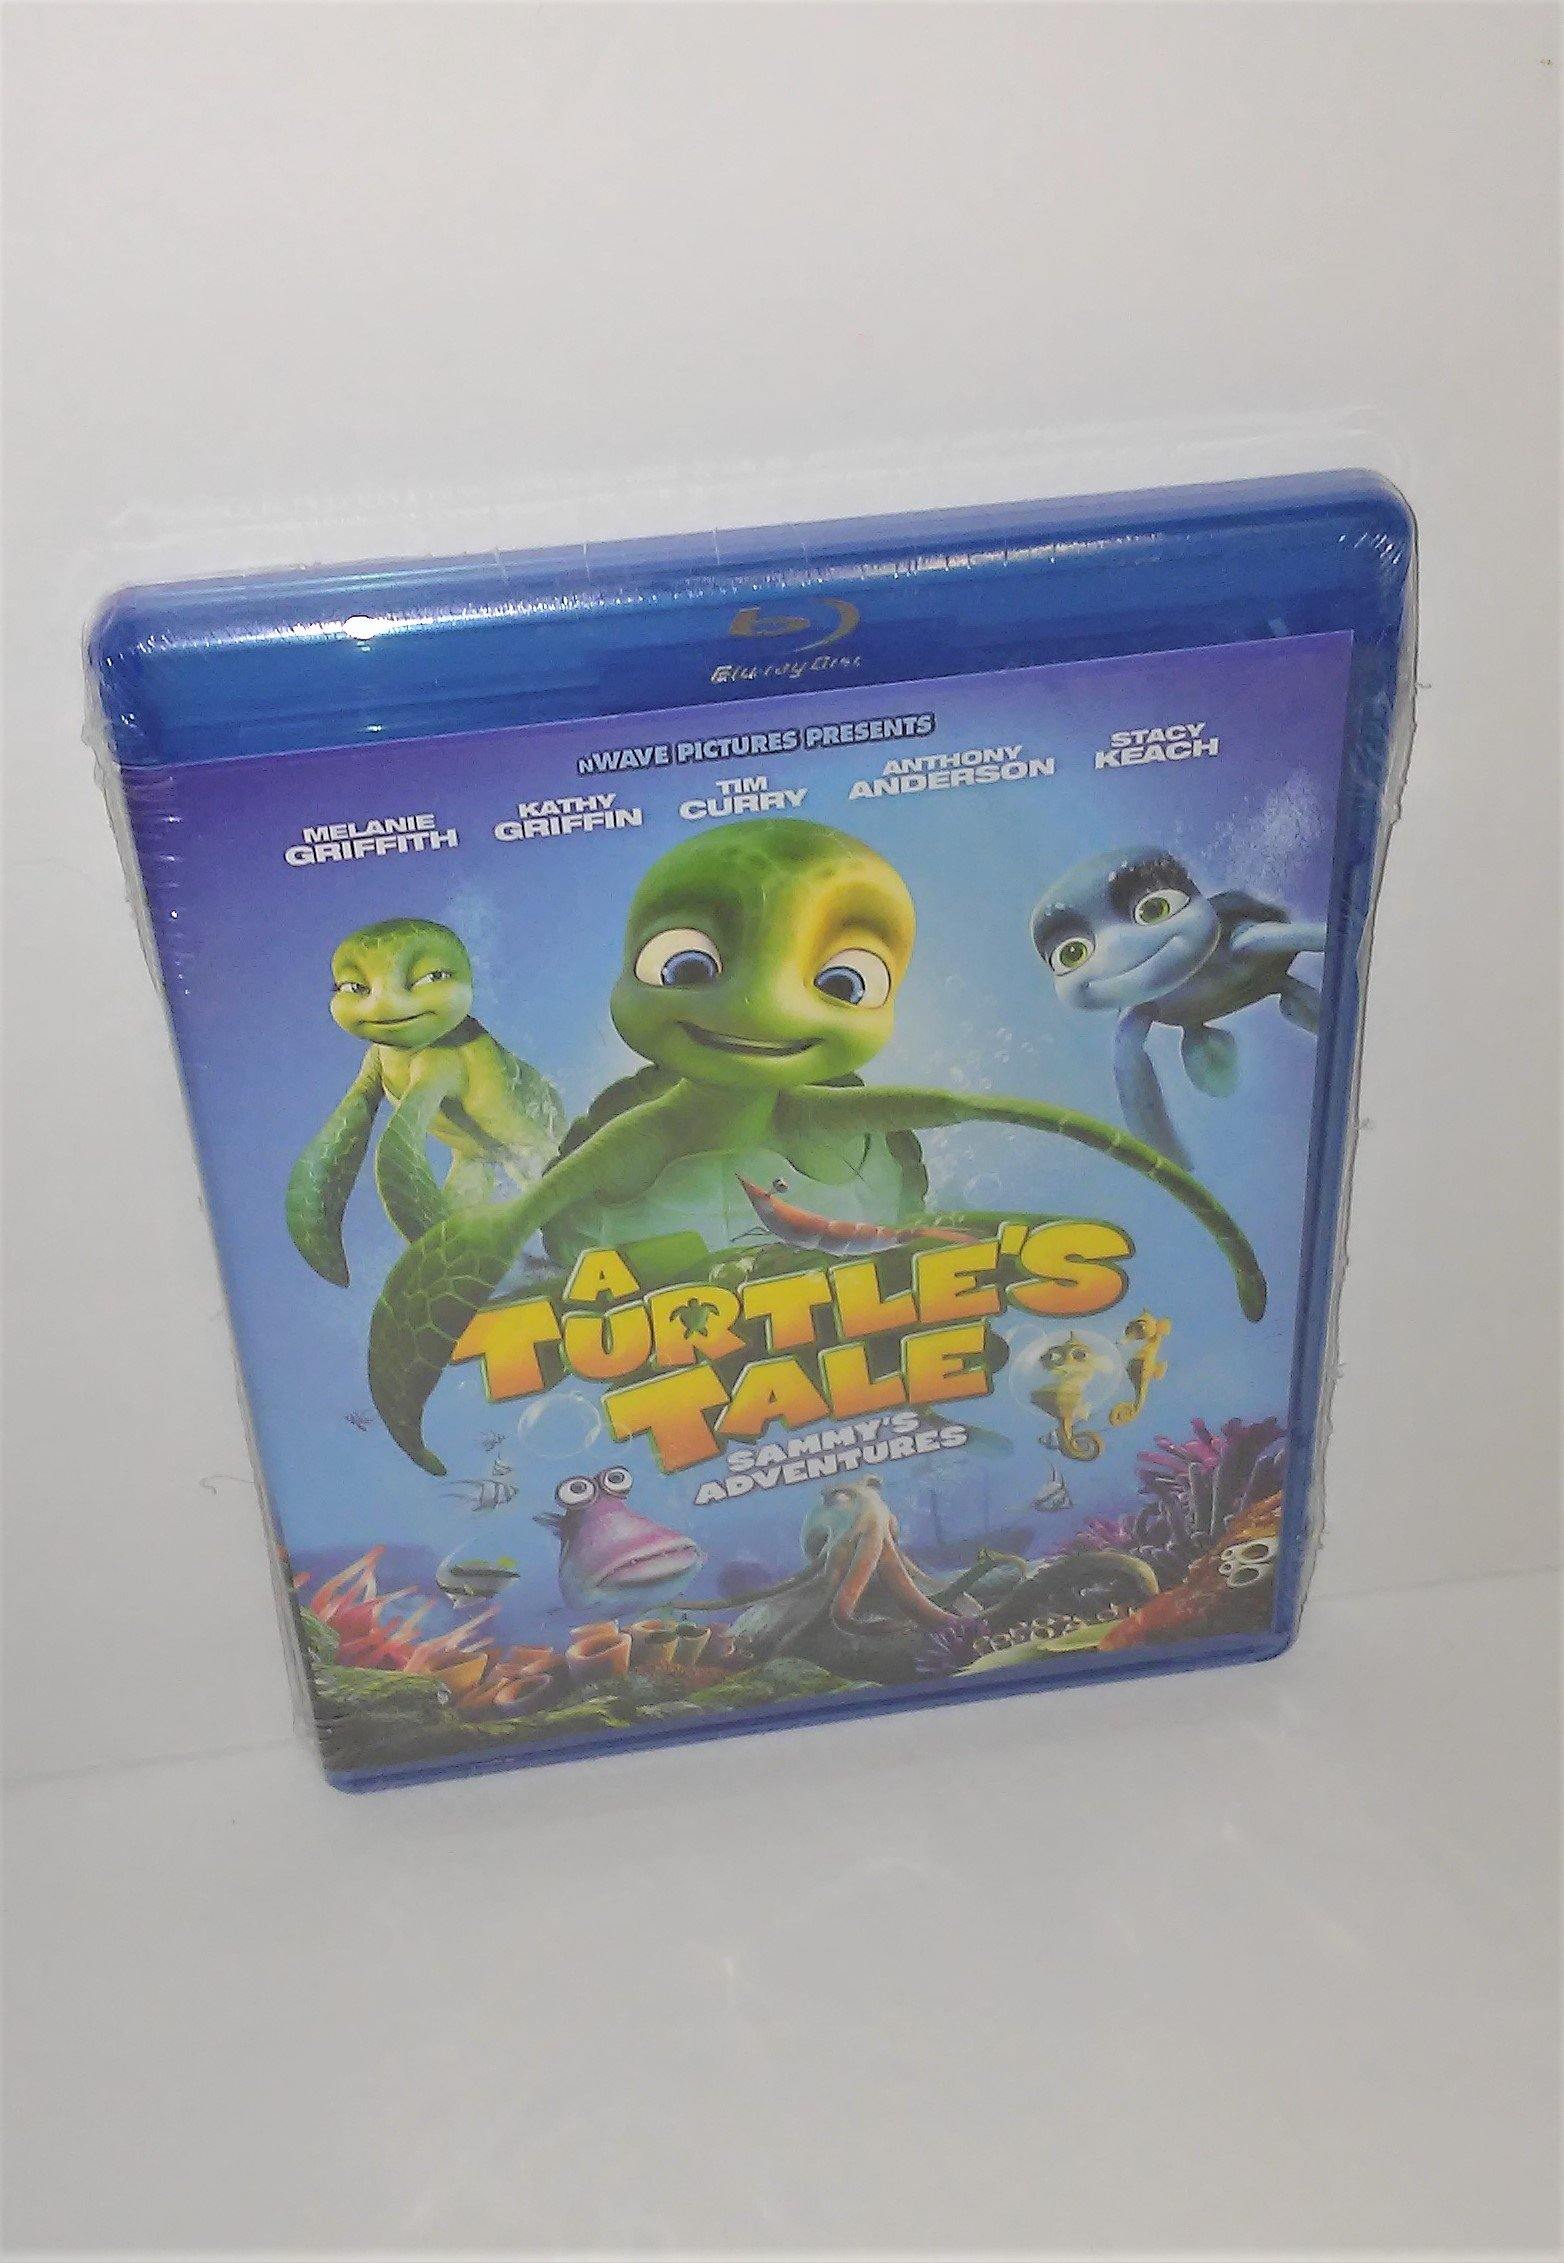 http://sandeesmemoriesandcollectibles.com/cdn/shop/products/A_Turtle_s_Tale_Sammy_s_Adventures_Blu-Ray.jpg?v=1606546228